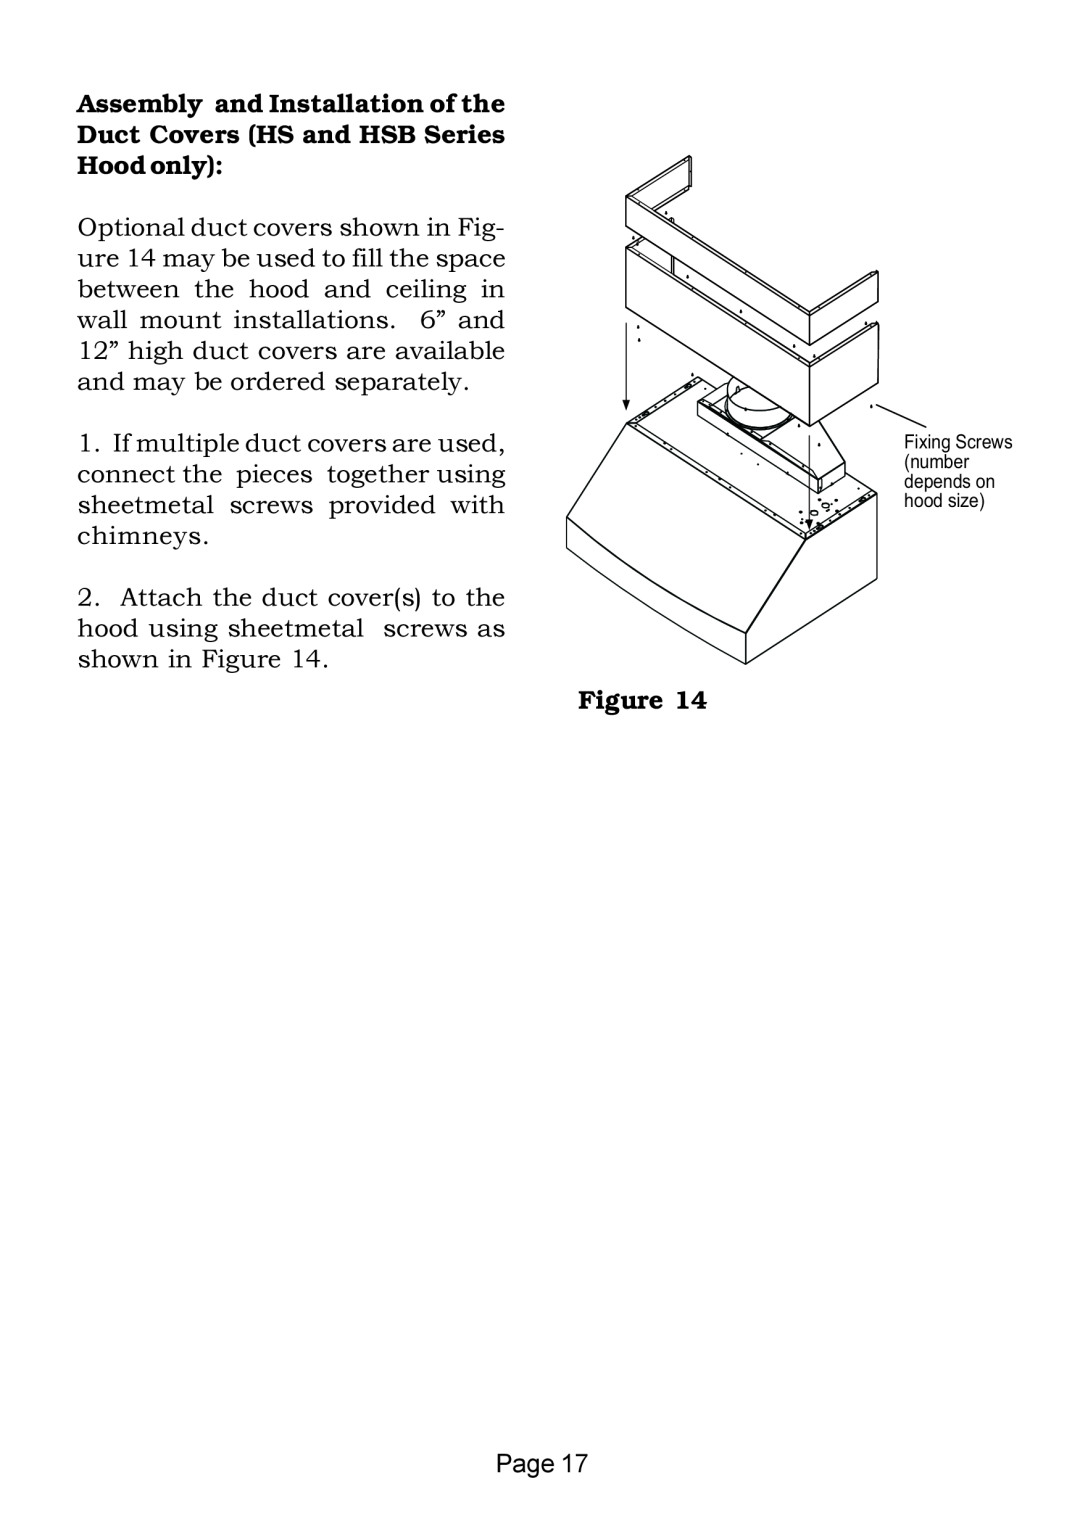 Thermador HS-HST-HSB installation instructions Assembly and Installation of the Duct Covers HS and HSB Series, Hood only 